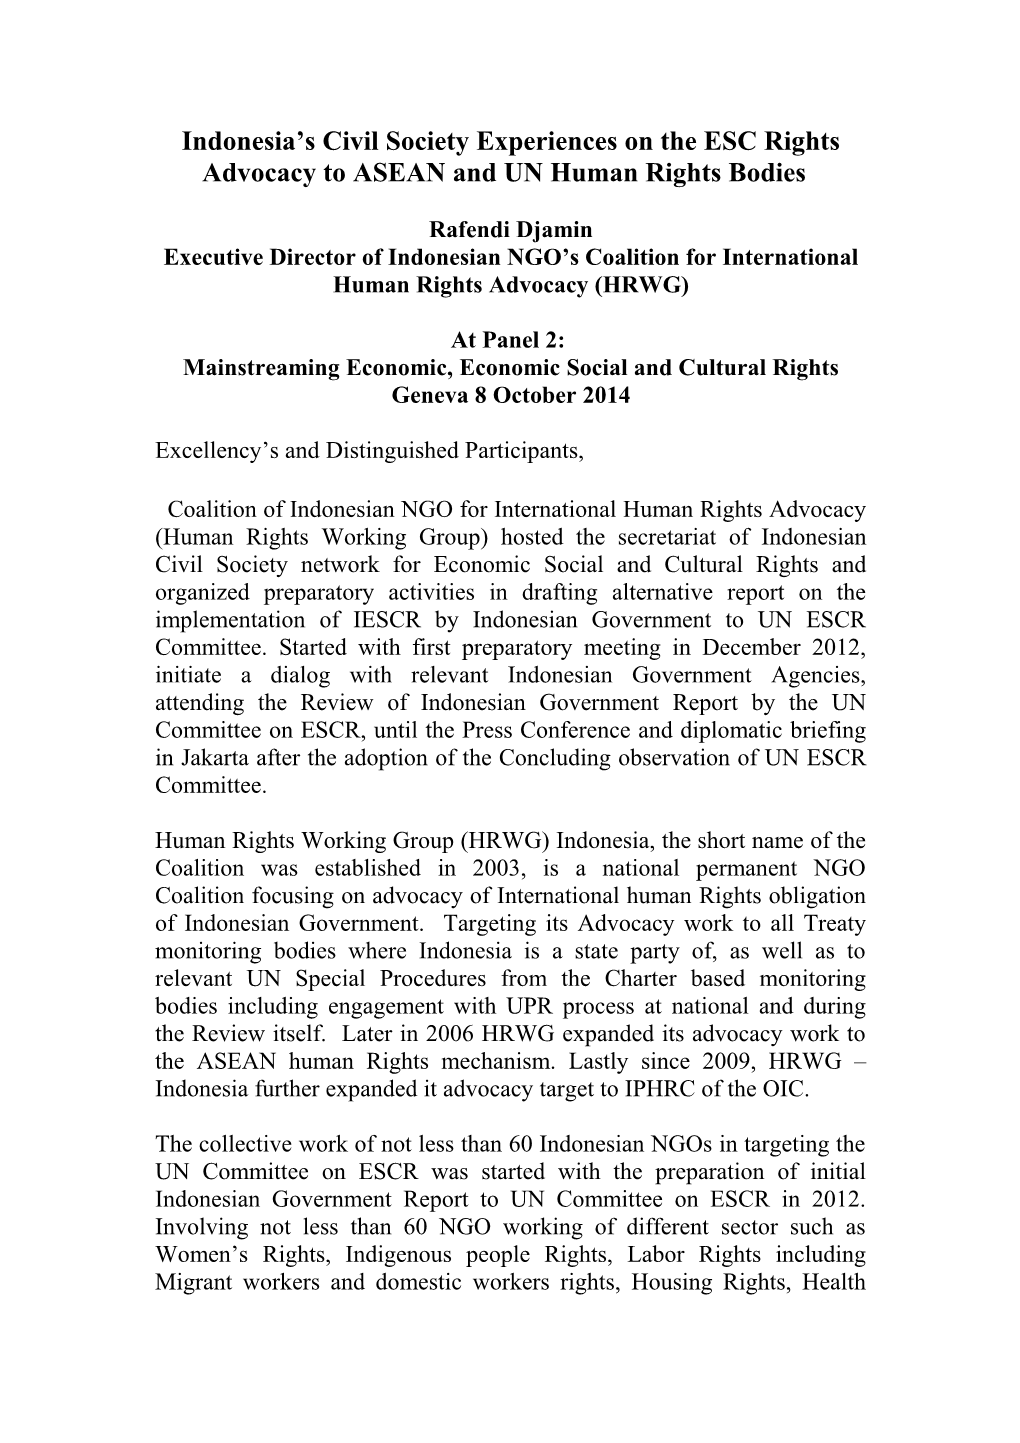 Executive Director Ofindonesian NGO S Coalition for International Human Rights Advocacy (HRWG)